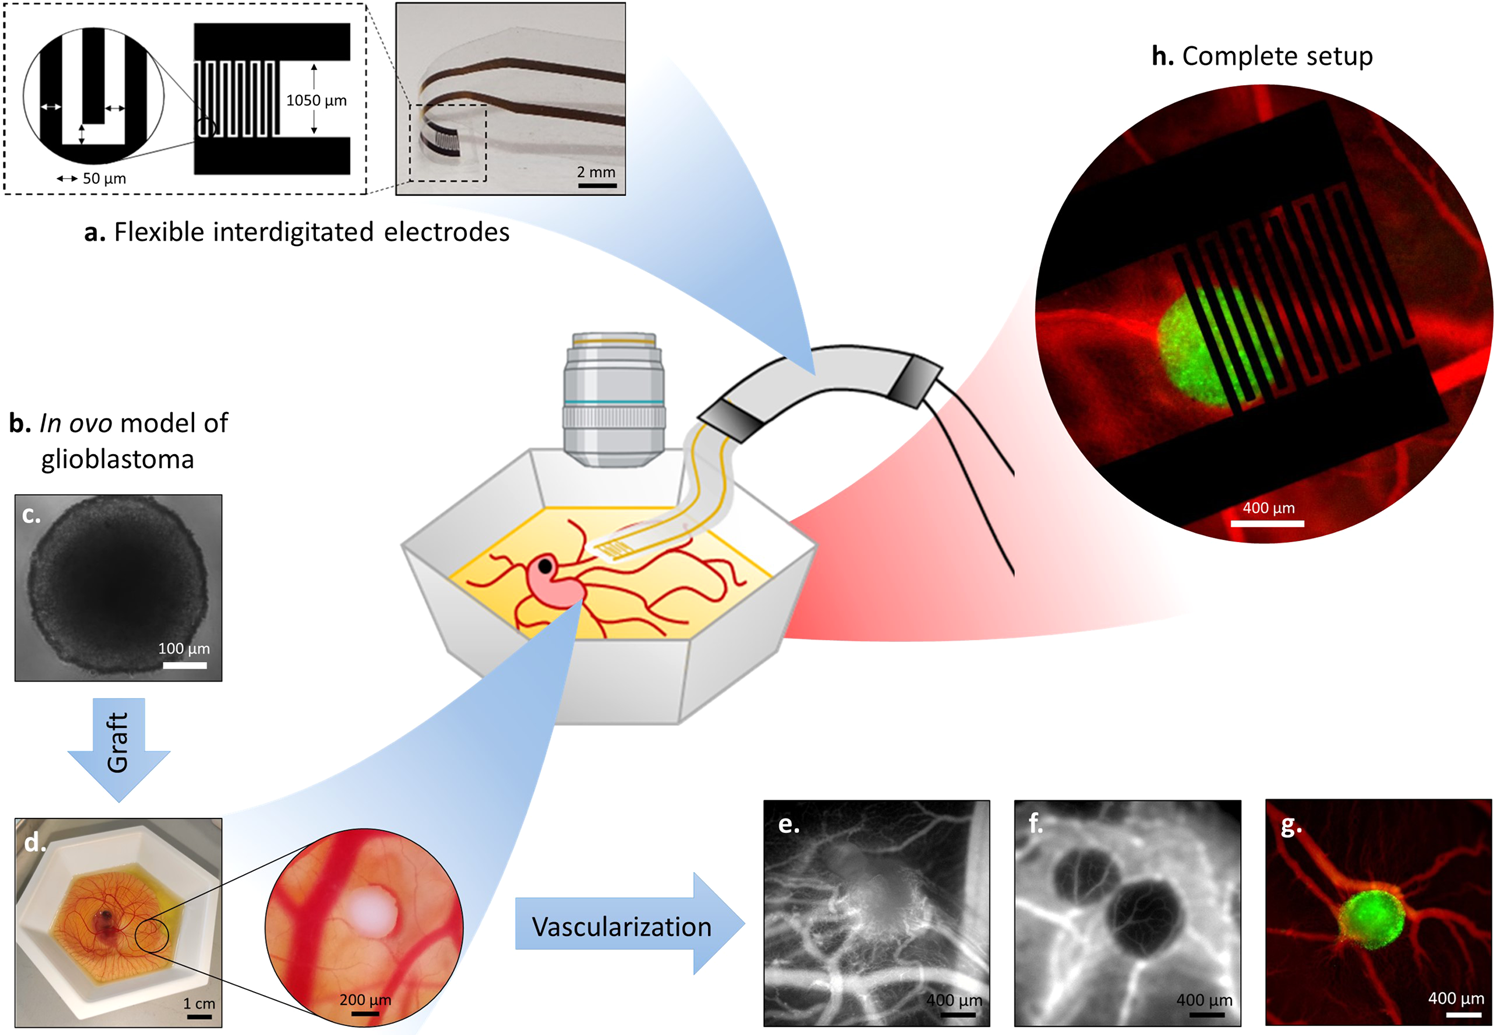 Integrating flexible electronics for pulsed electric field delivery in a  vascularized 3D glioblastoma model | npj Flexible Electronics